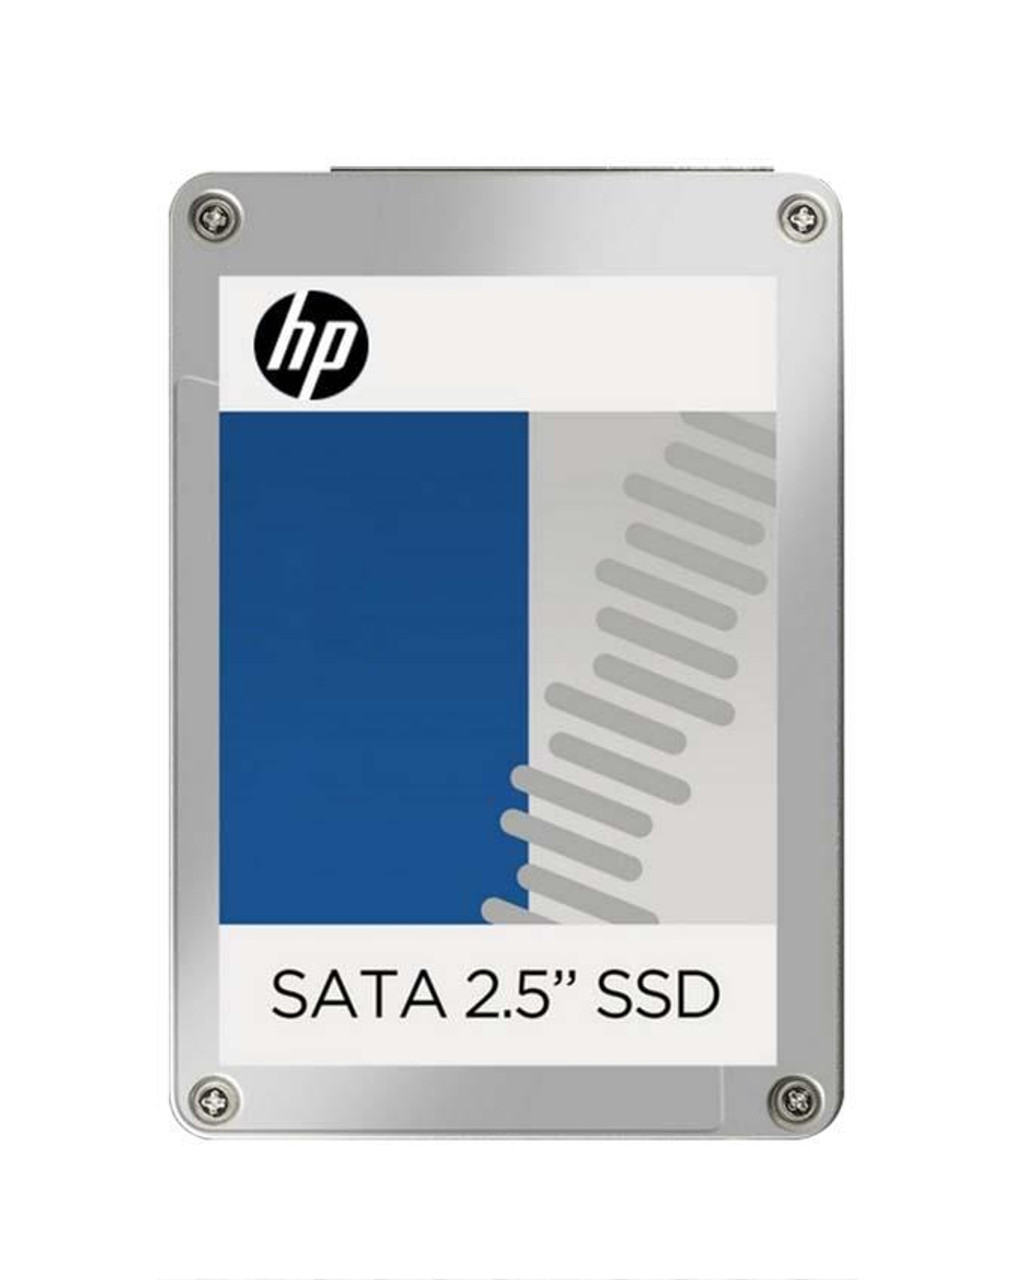 804665-B21#0D1 HPE 400GB MLC SATA 6Gbps Hot Swap Write Intensive-2 2.5-inch Internal Solid State Drive (SSD) with Smart Carrier for ProLiant Gen8 Server